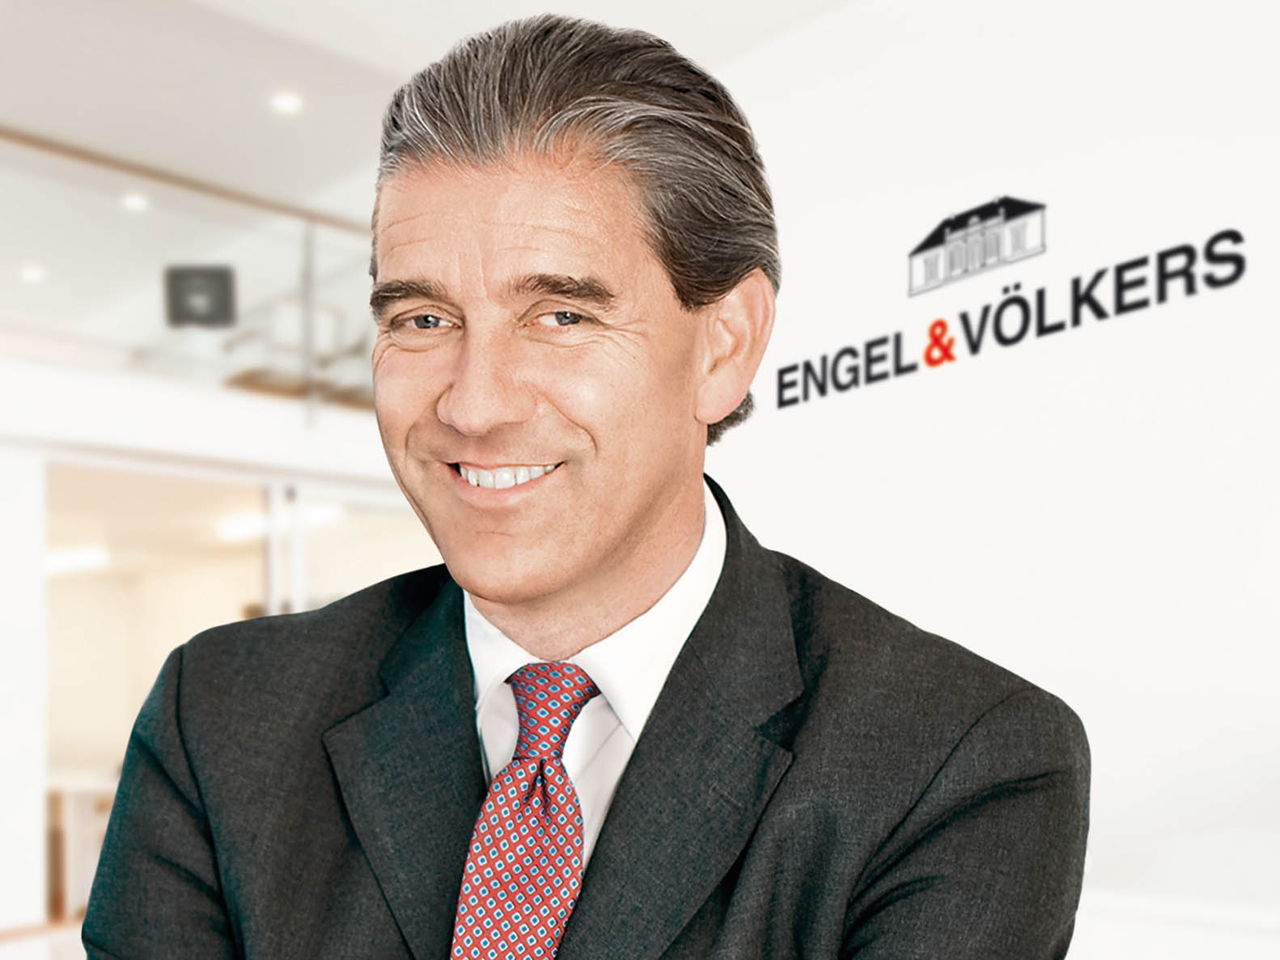 Engel & Völkers reports turnover growth in the first half-year of 2018